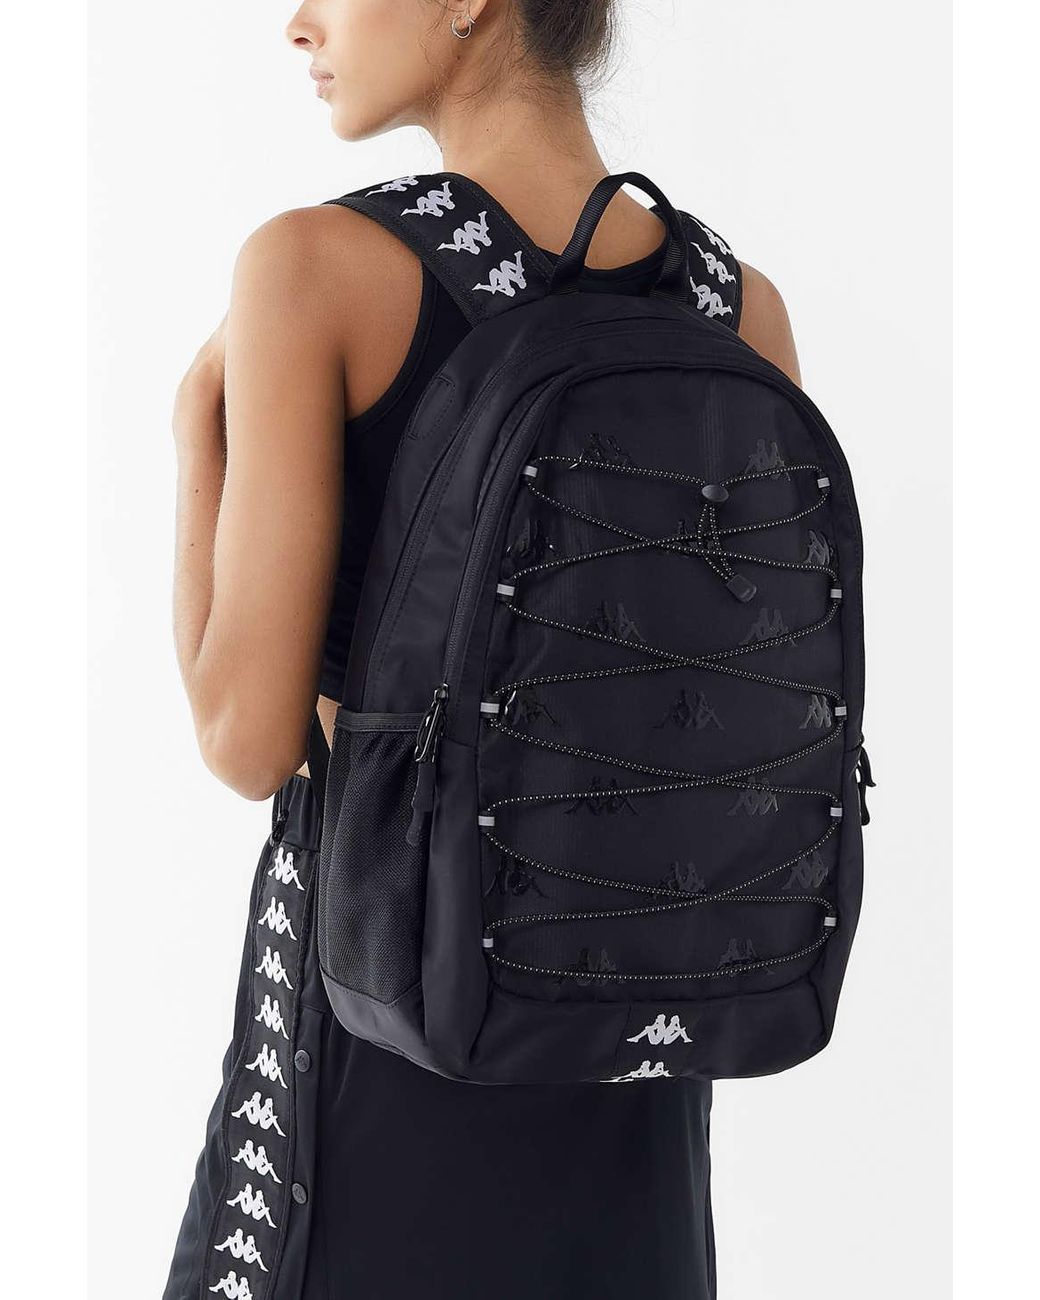 Kappa The Premium Backpack In Black And White | Lyst